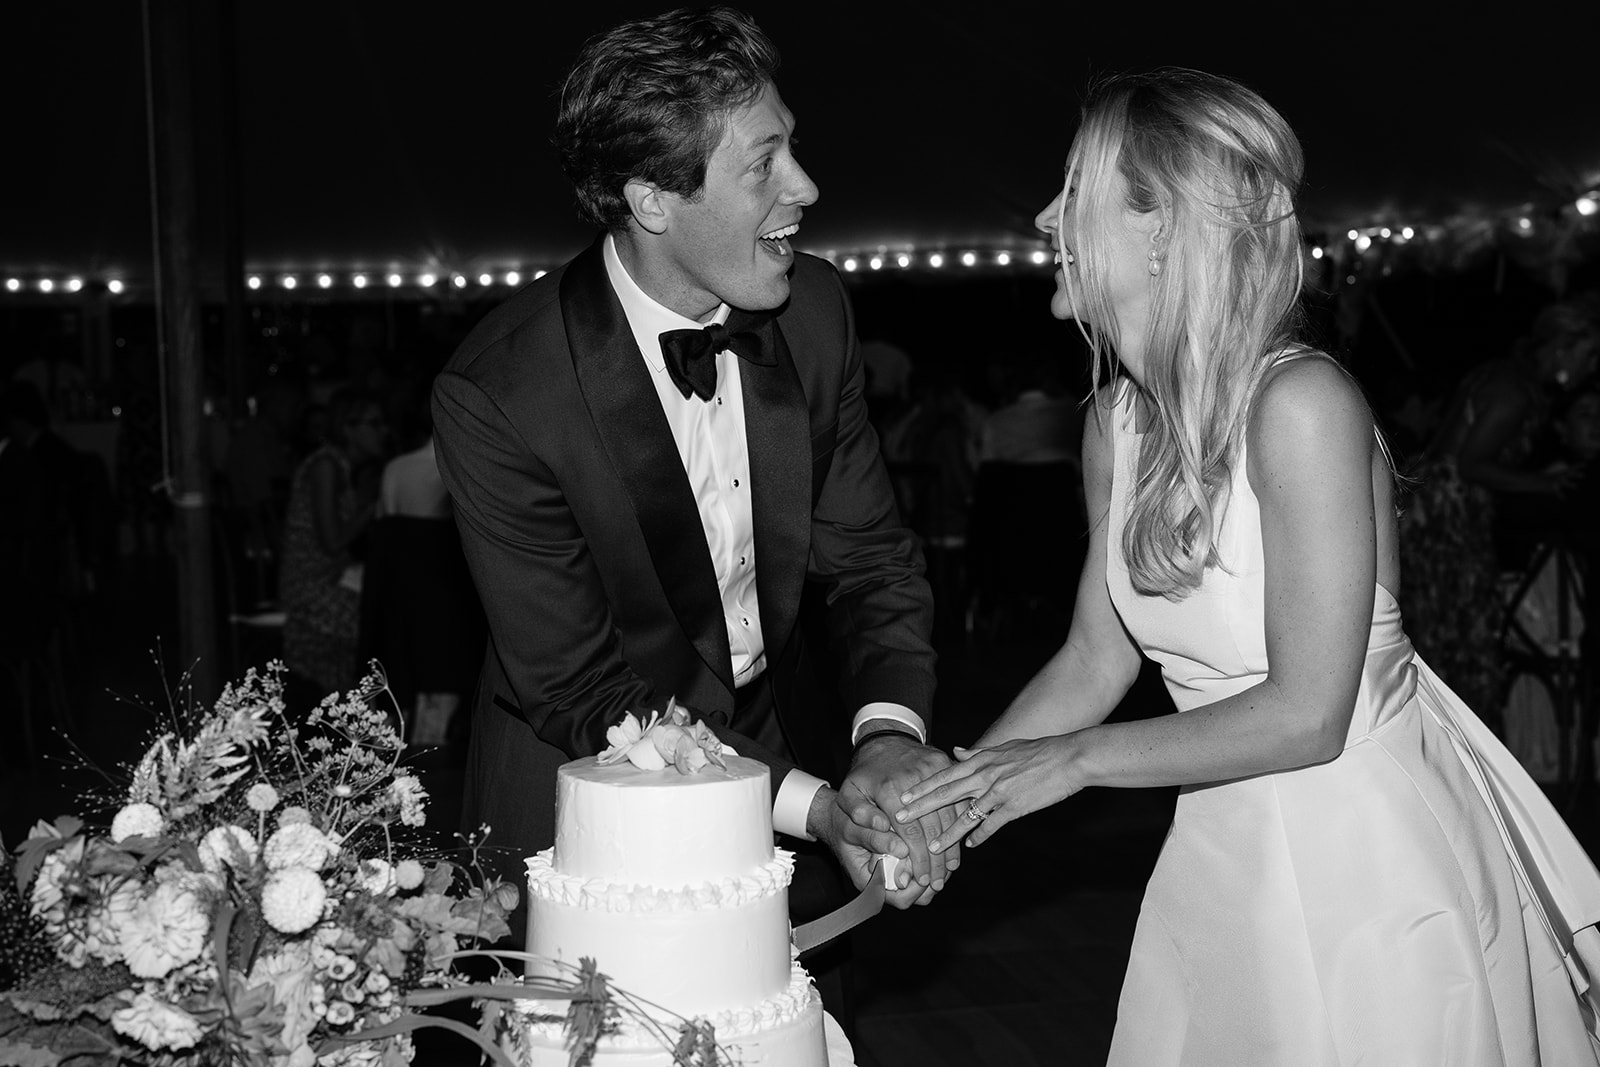 Bride and groom looking at each other laughing while cutting their cake in black and white